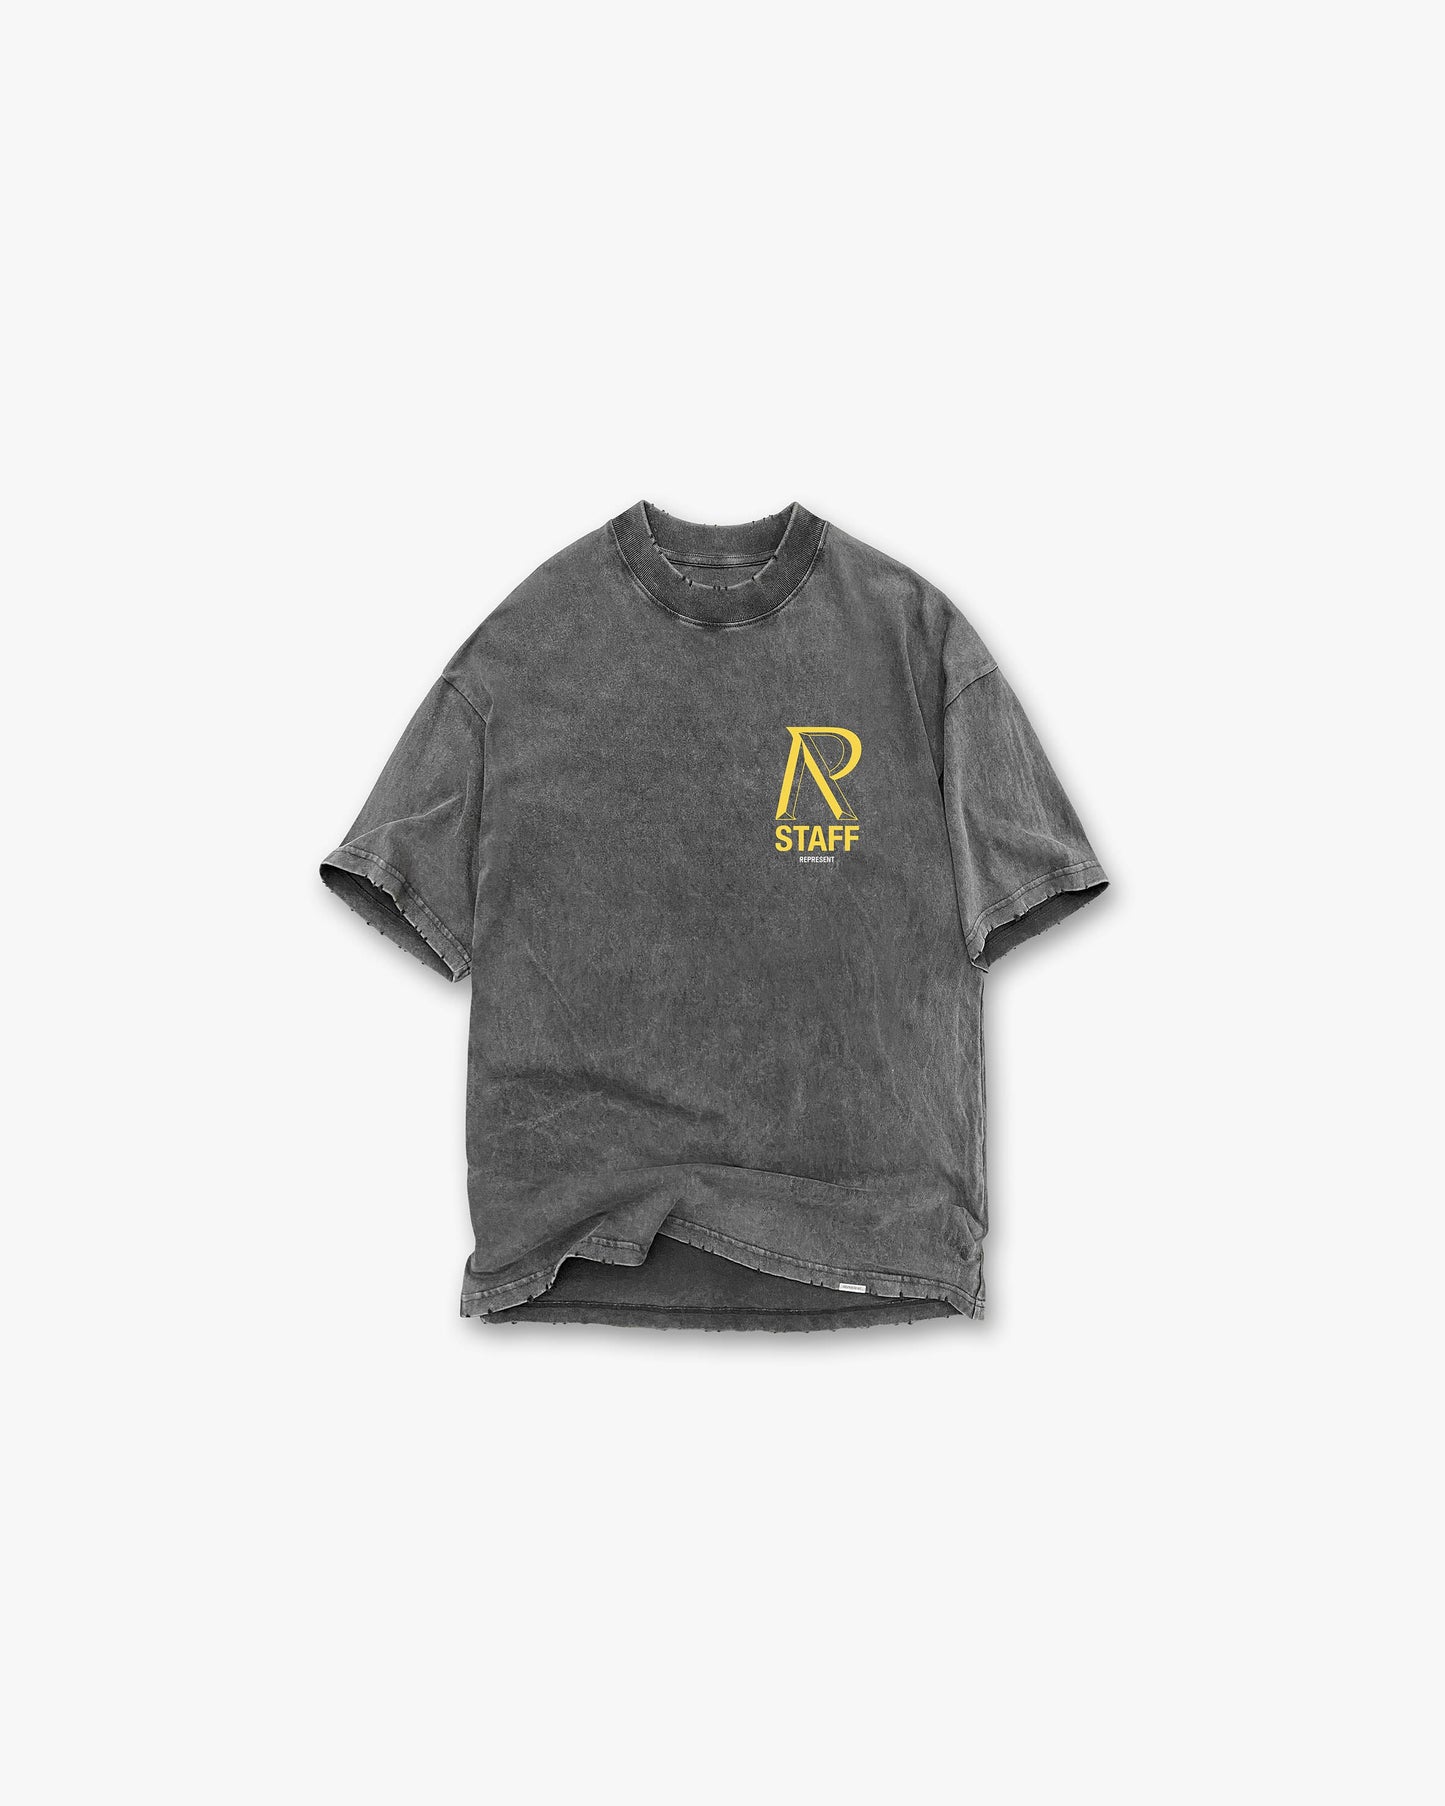 REPRESENT REPRESENT LONDON INITIALISM T-SHIRT IN GREY AND YELLOW